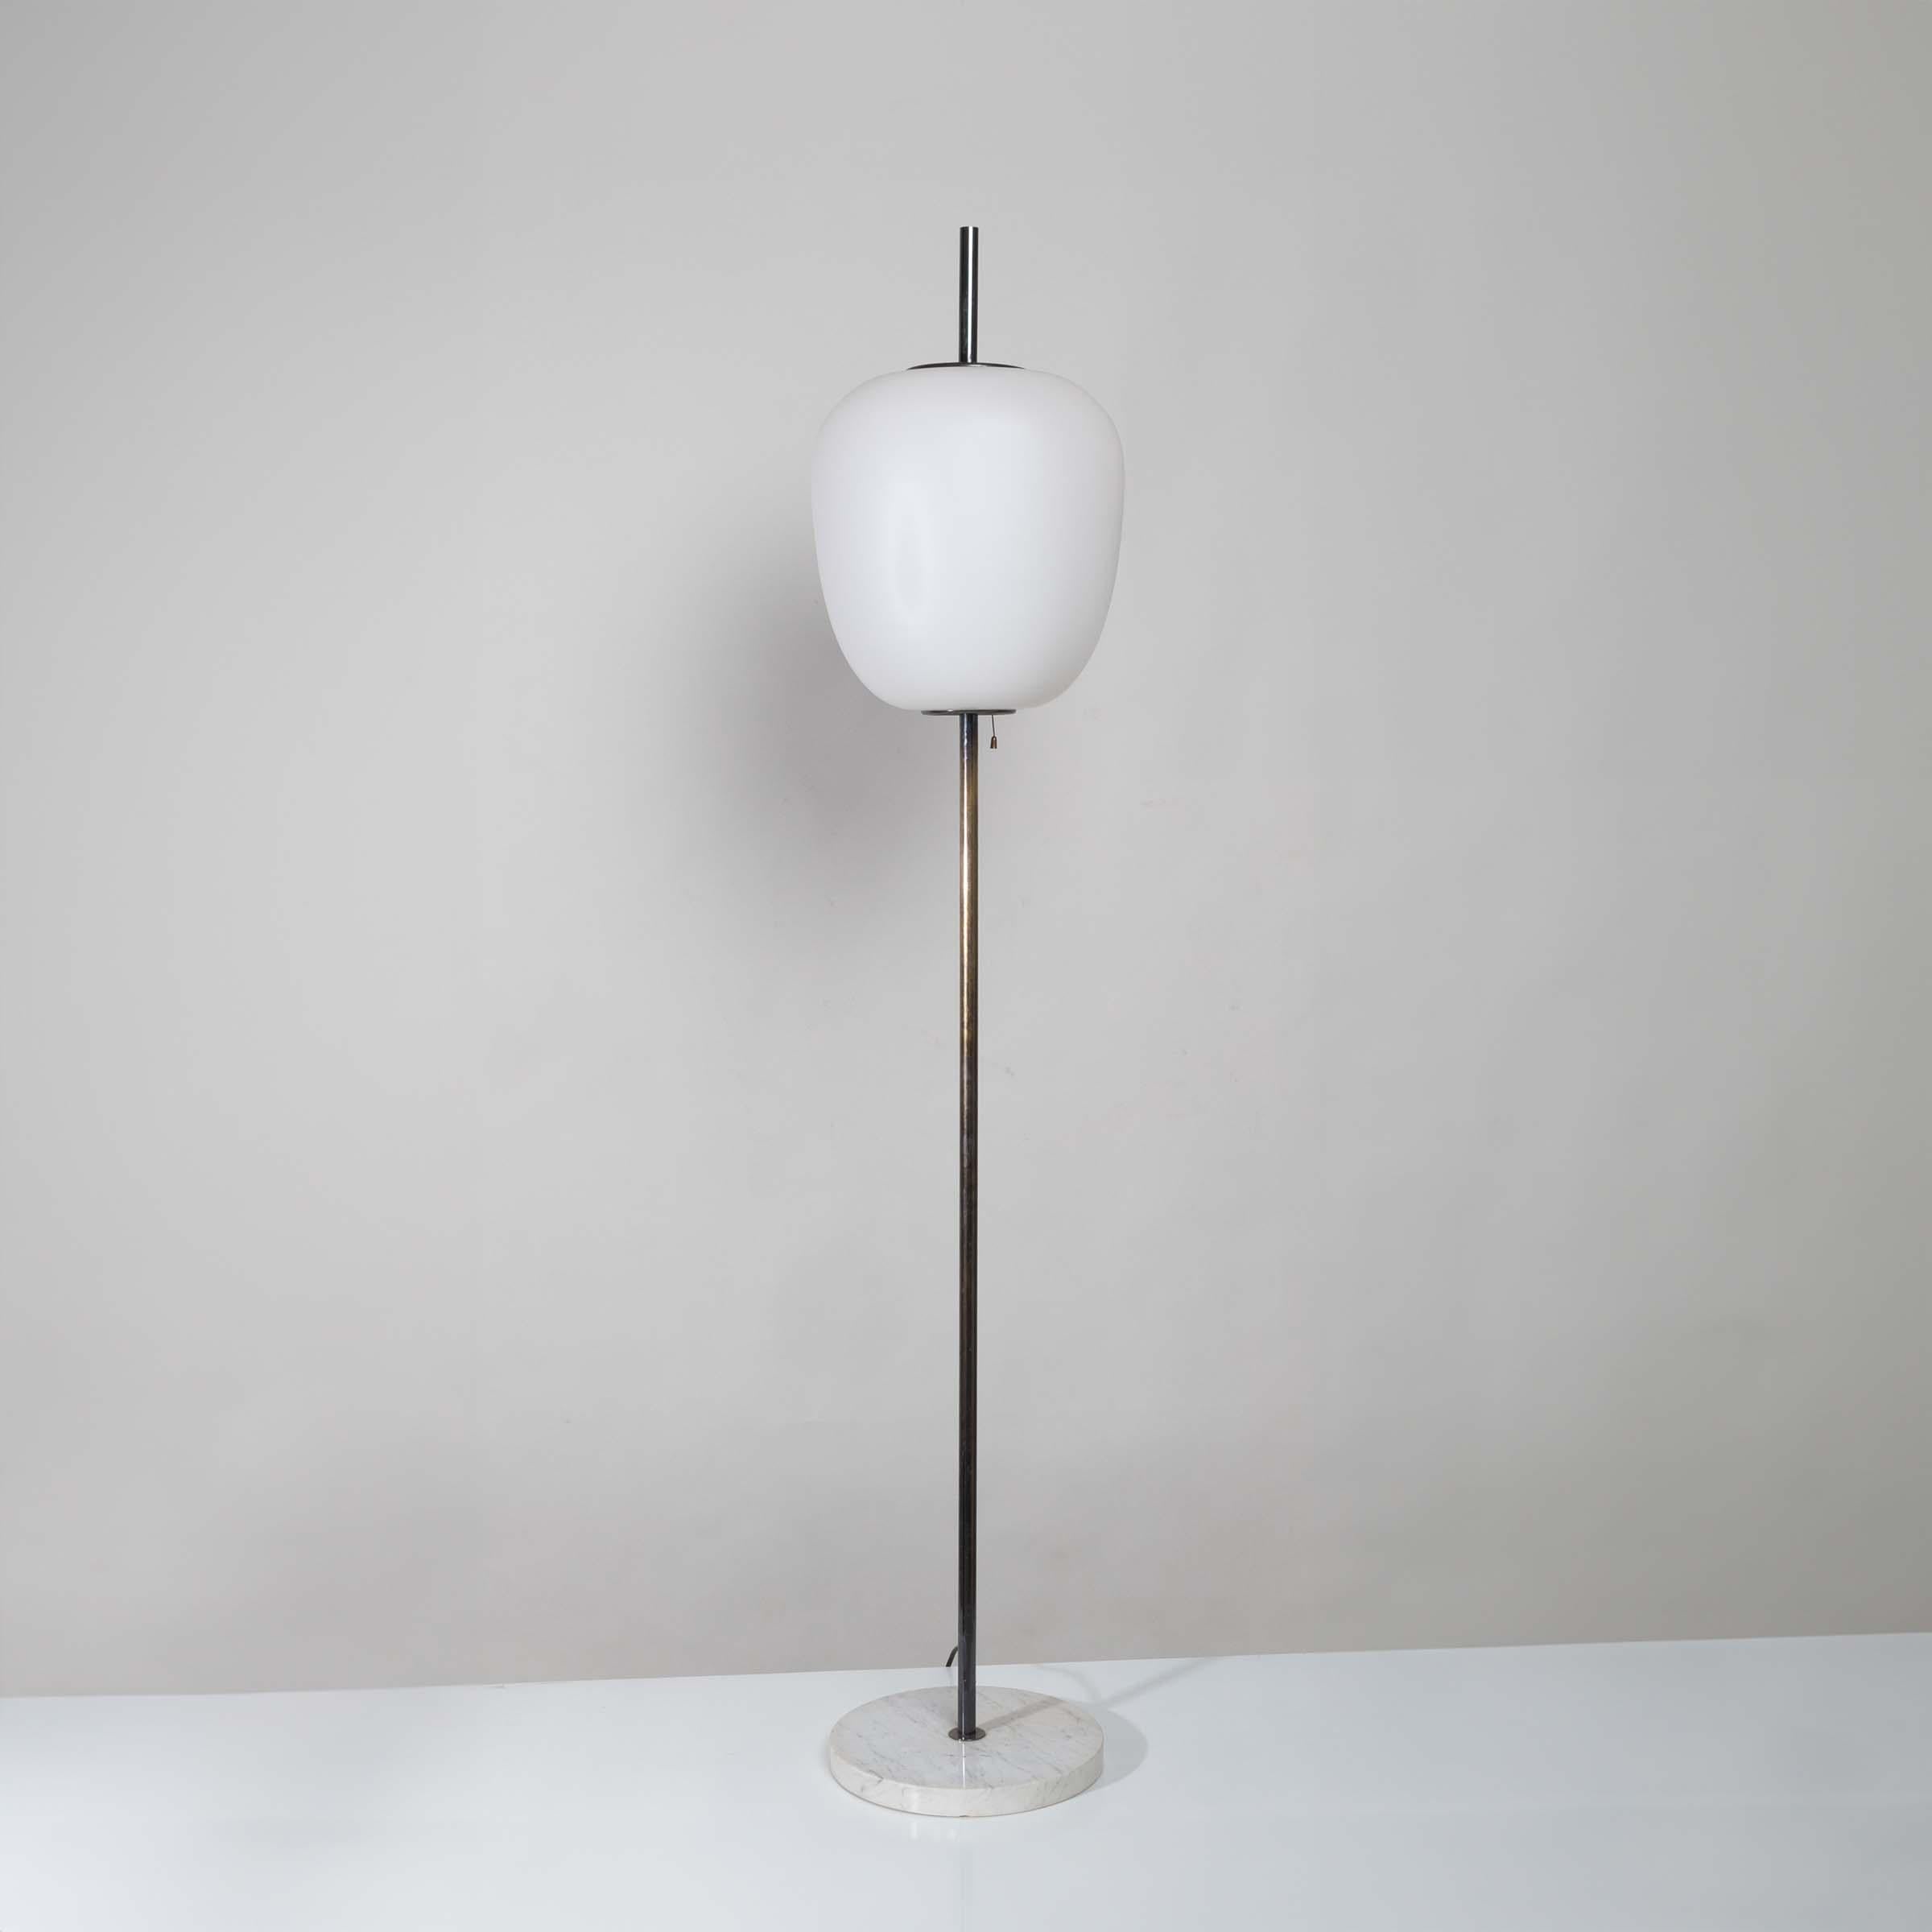 The J14 floor lamp, designed by Joseph-André Motte, epitomizes timeless elegance and artistic refinement. Its marble base provides a solid and luxurious foundation, while the brass stem boasts a “gunmetal” finish, adding a contemporary and